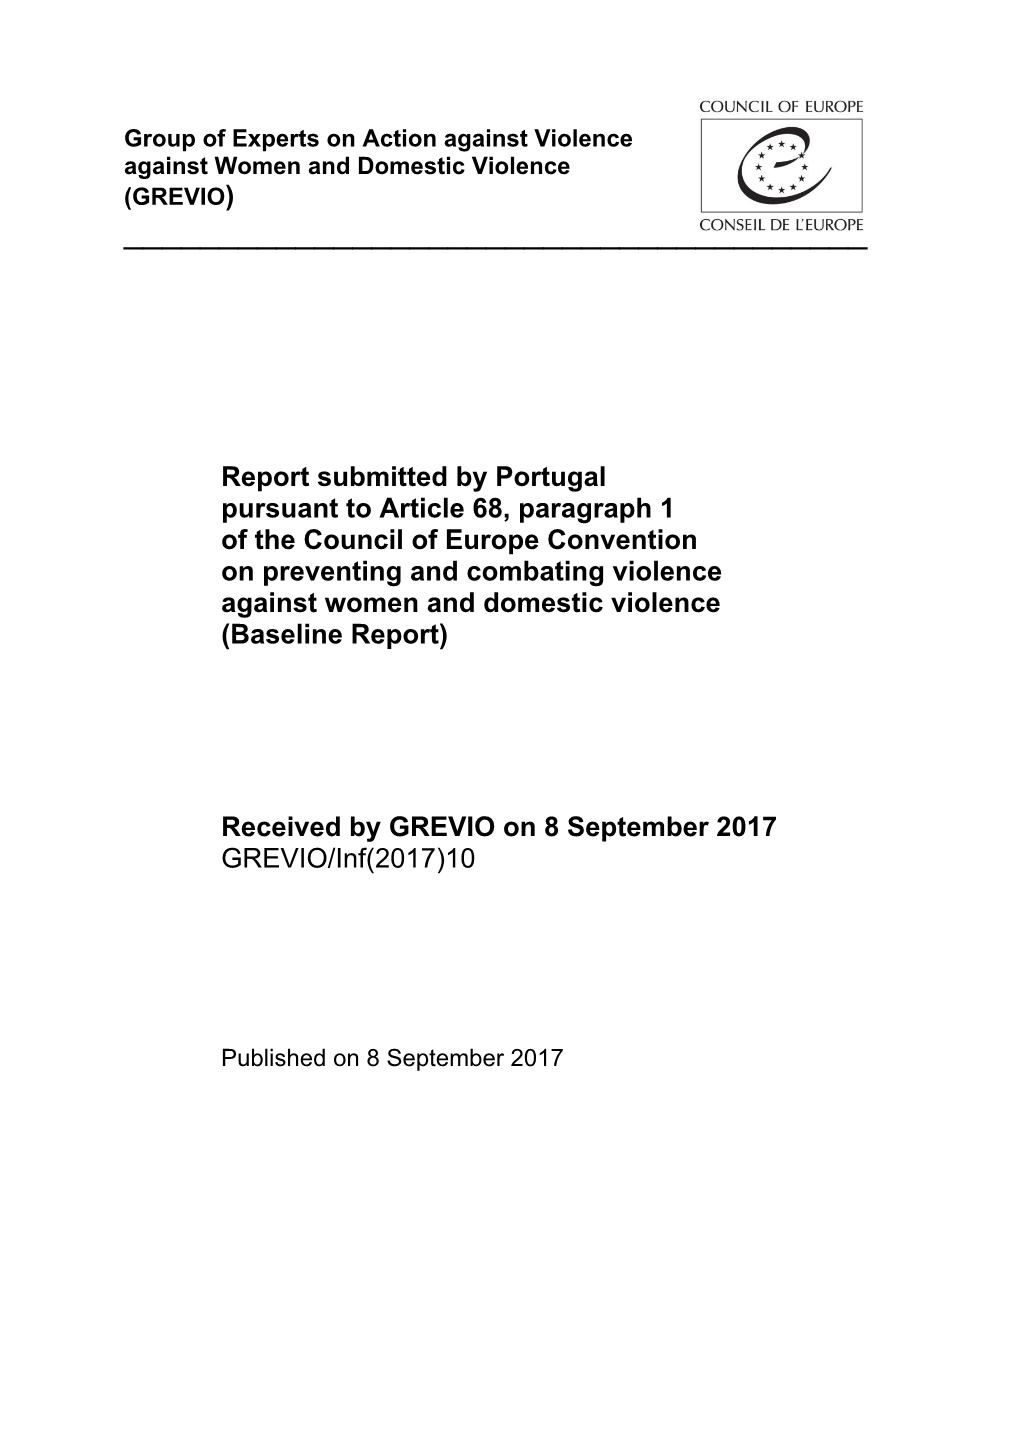 Report Submitted by Portugal Pursuant to Article 68, Paragraph 1 of The